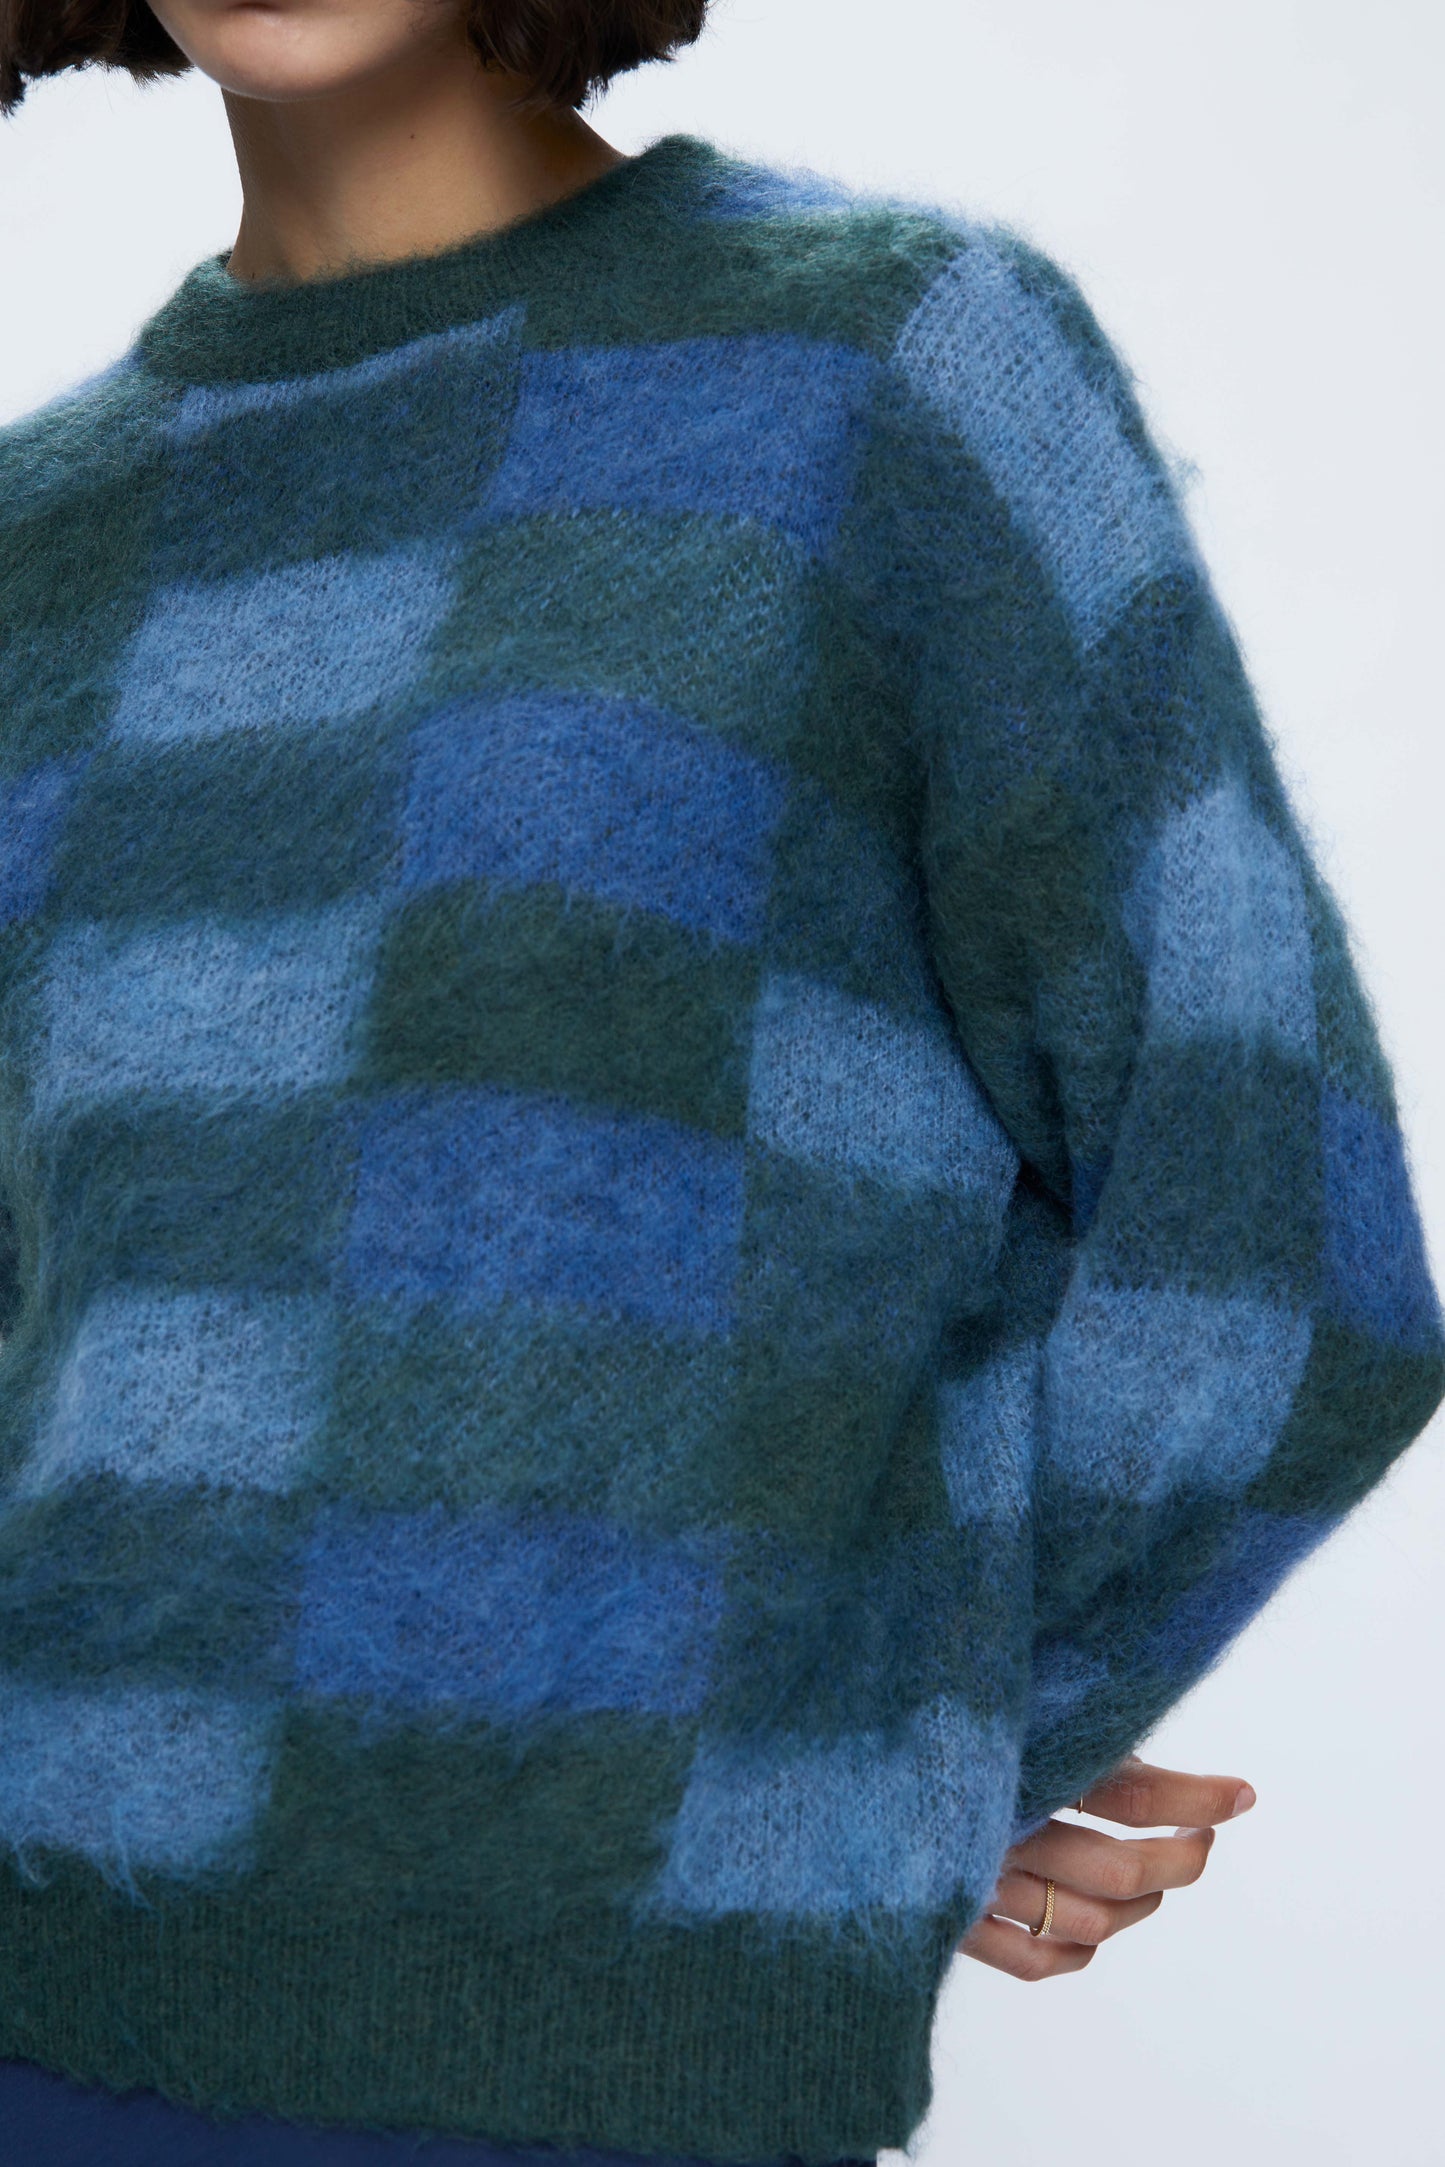 Soft knit sweater with blue check print